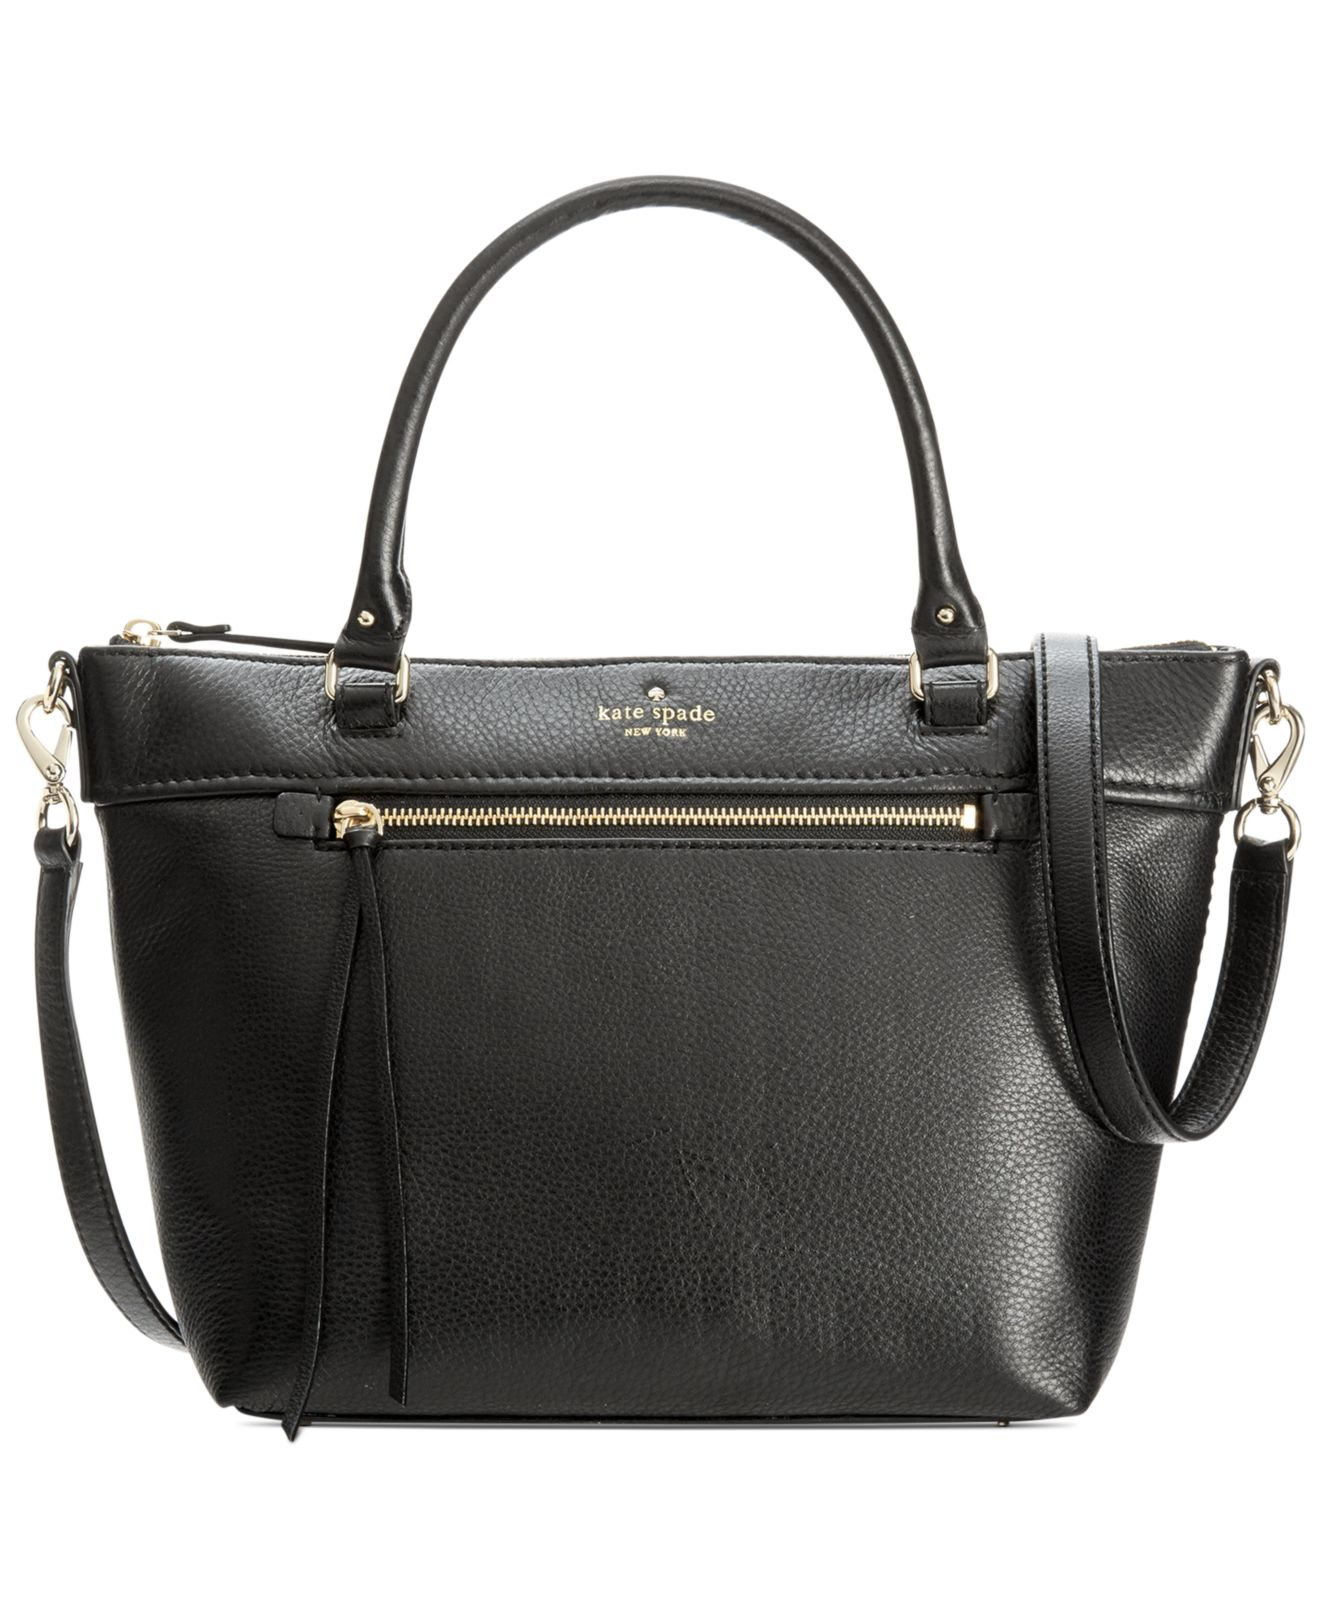 Kate Spade Cobble Hill Small Gina Tote in Black | Lyst